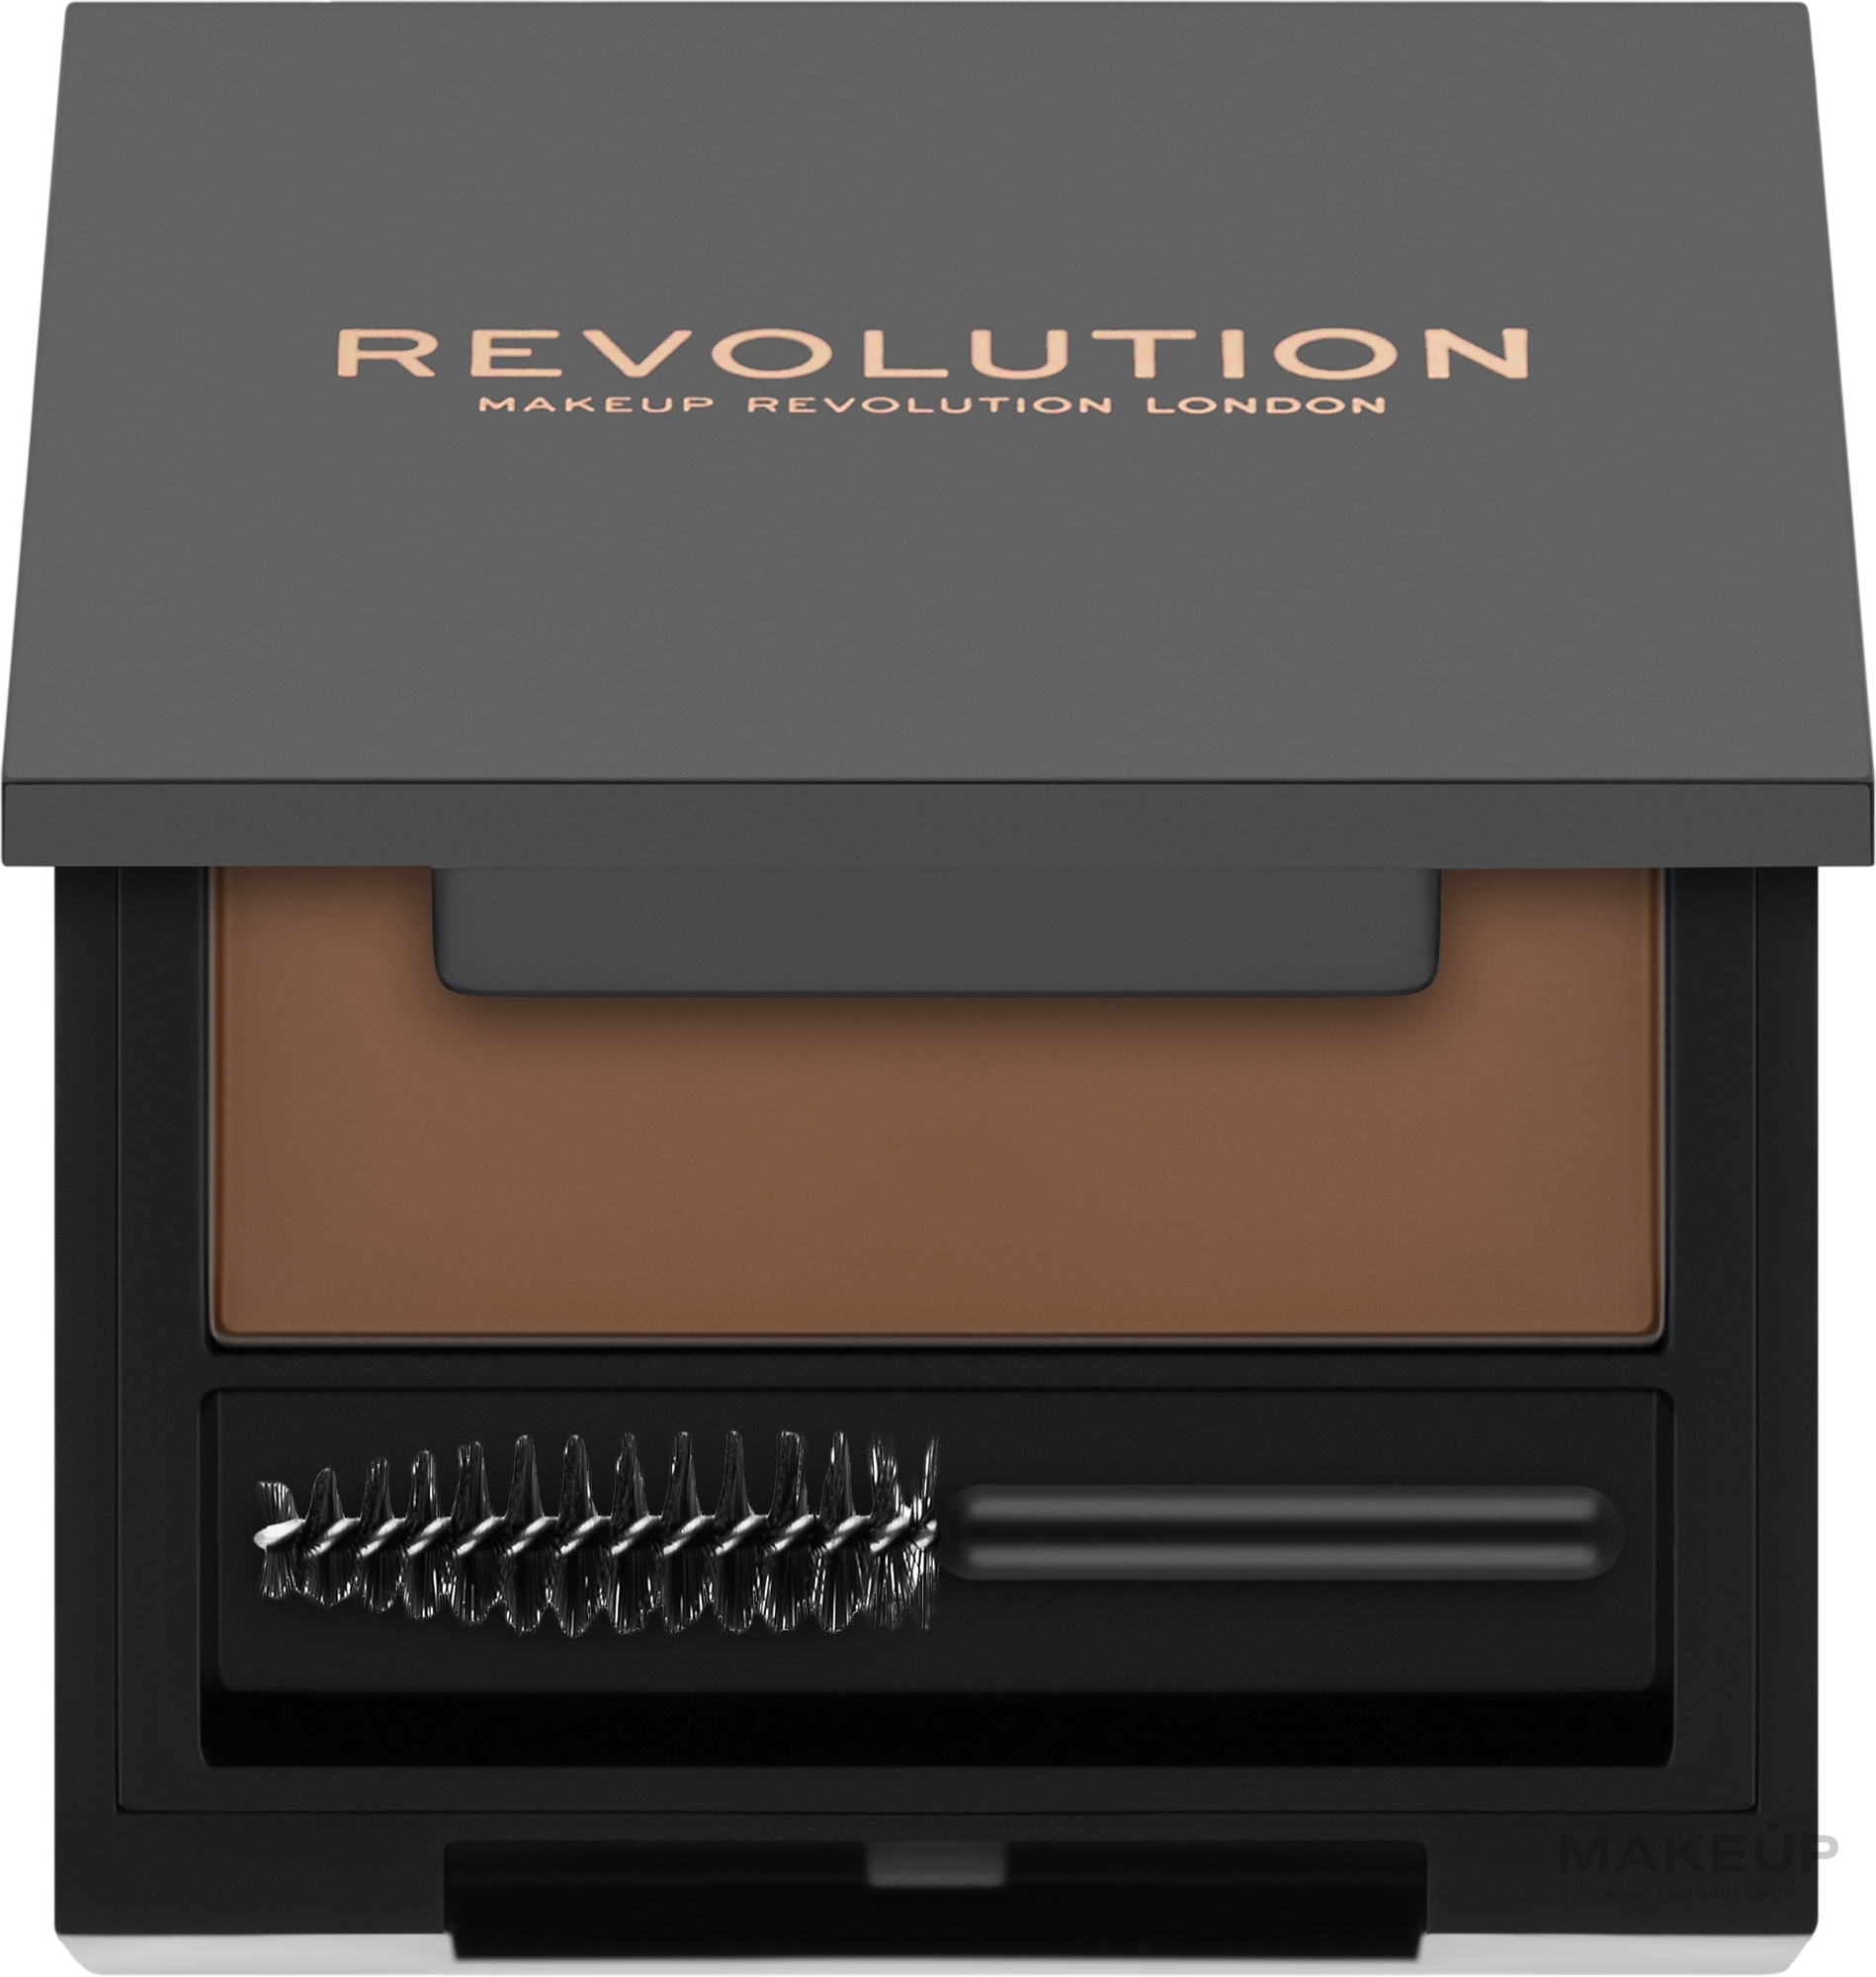 Brow Styling Soap - Makeup Revolution Soap Styler Bar Soap — photo Brown